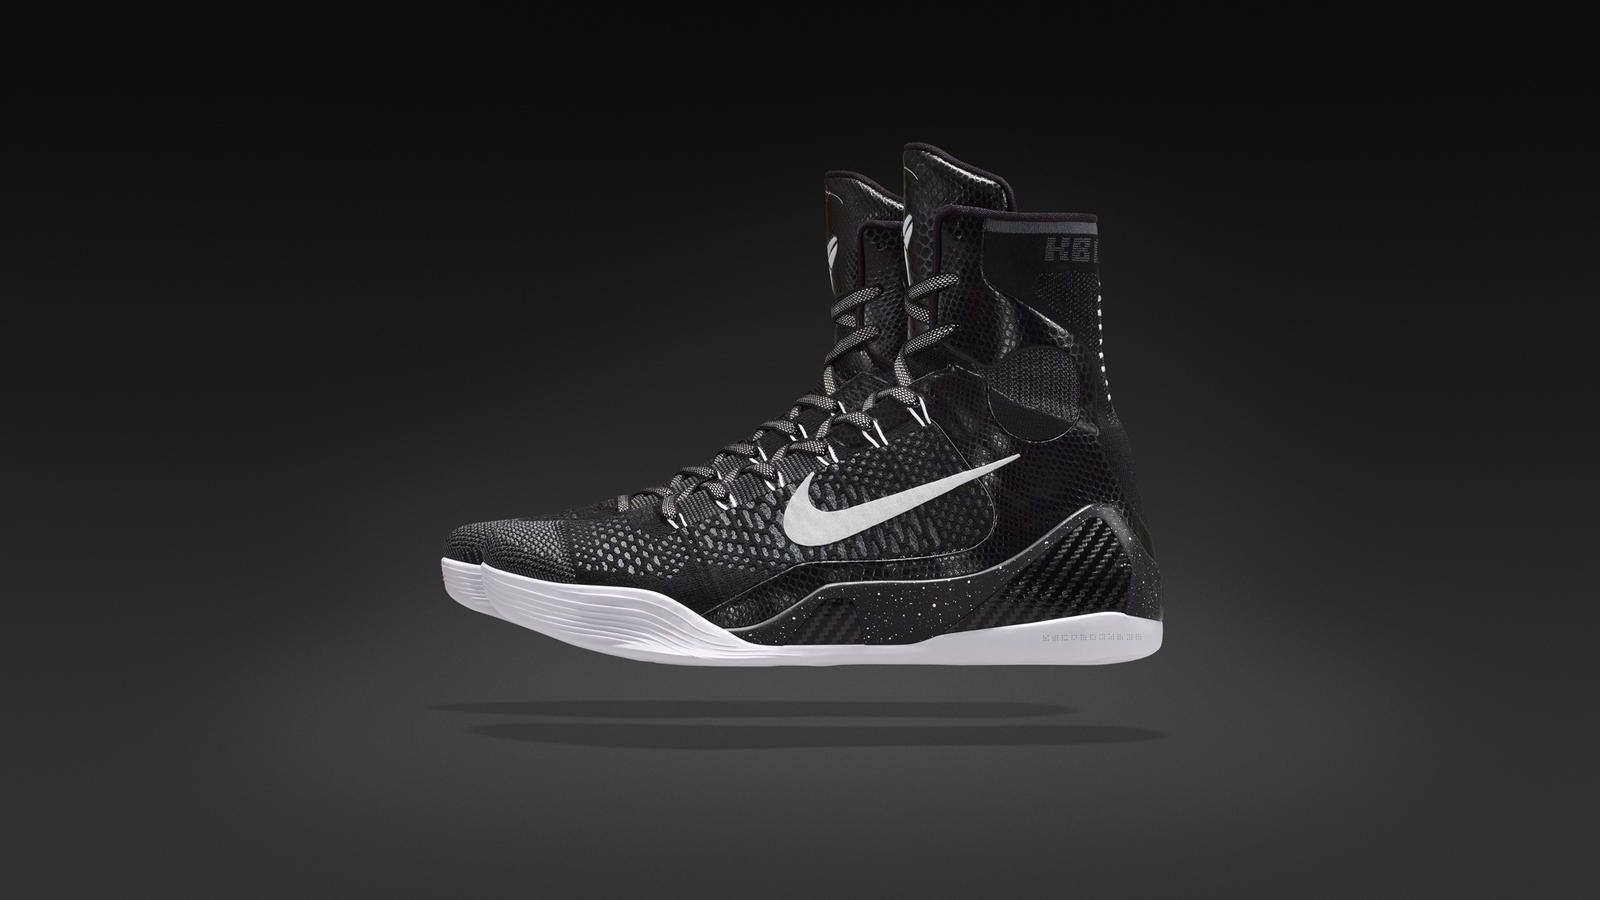 The KOBE 9 Elite in Two New Exclusive Colorways